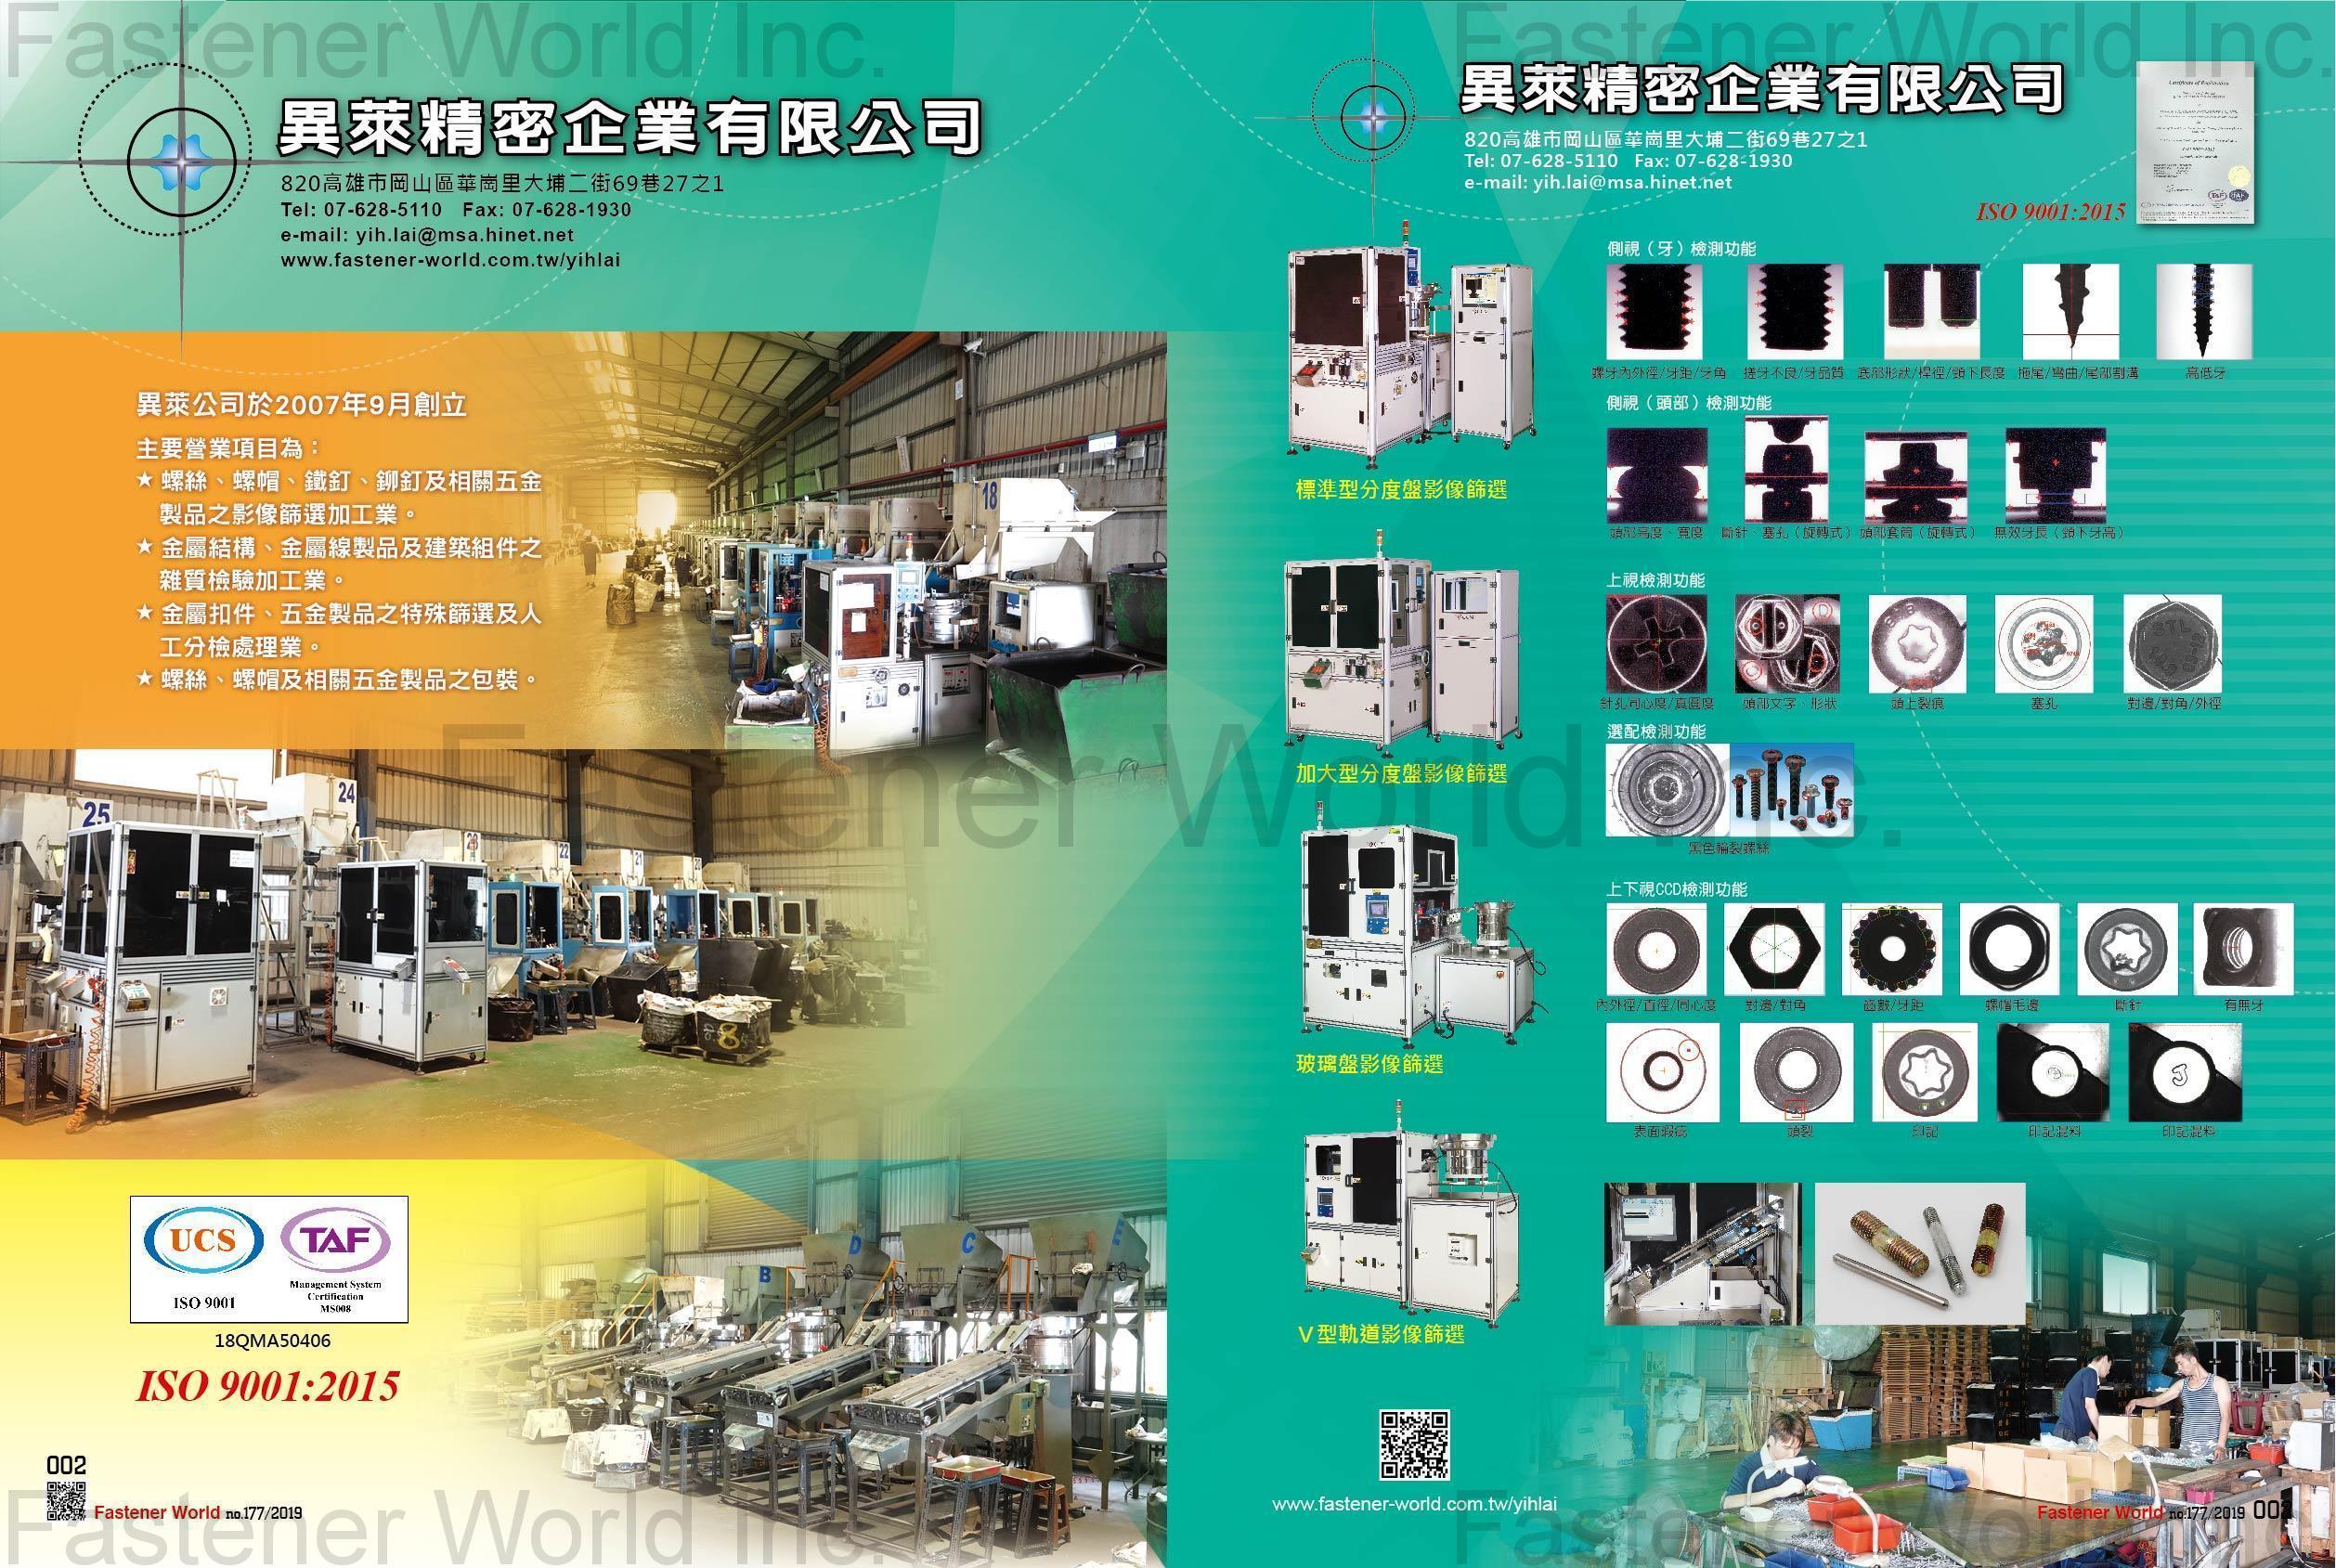  , Secondary product processing service